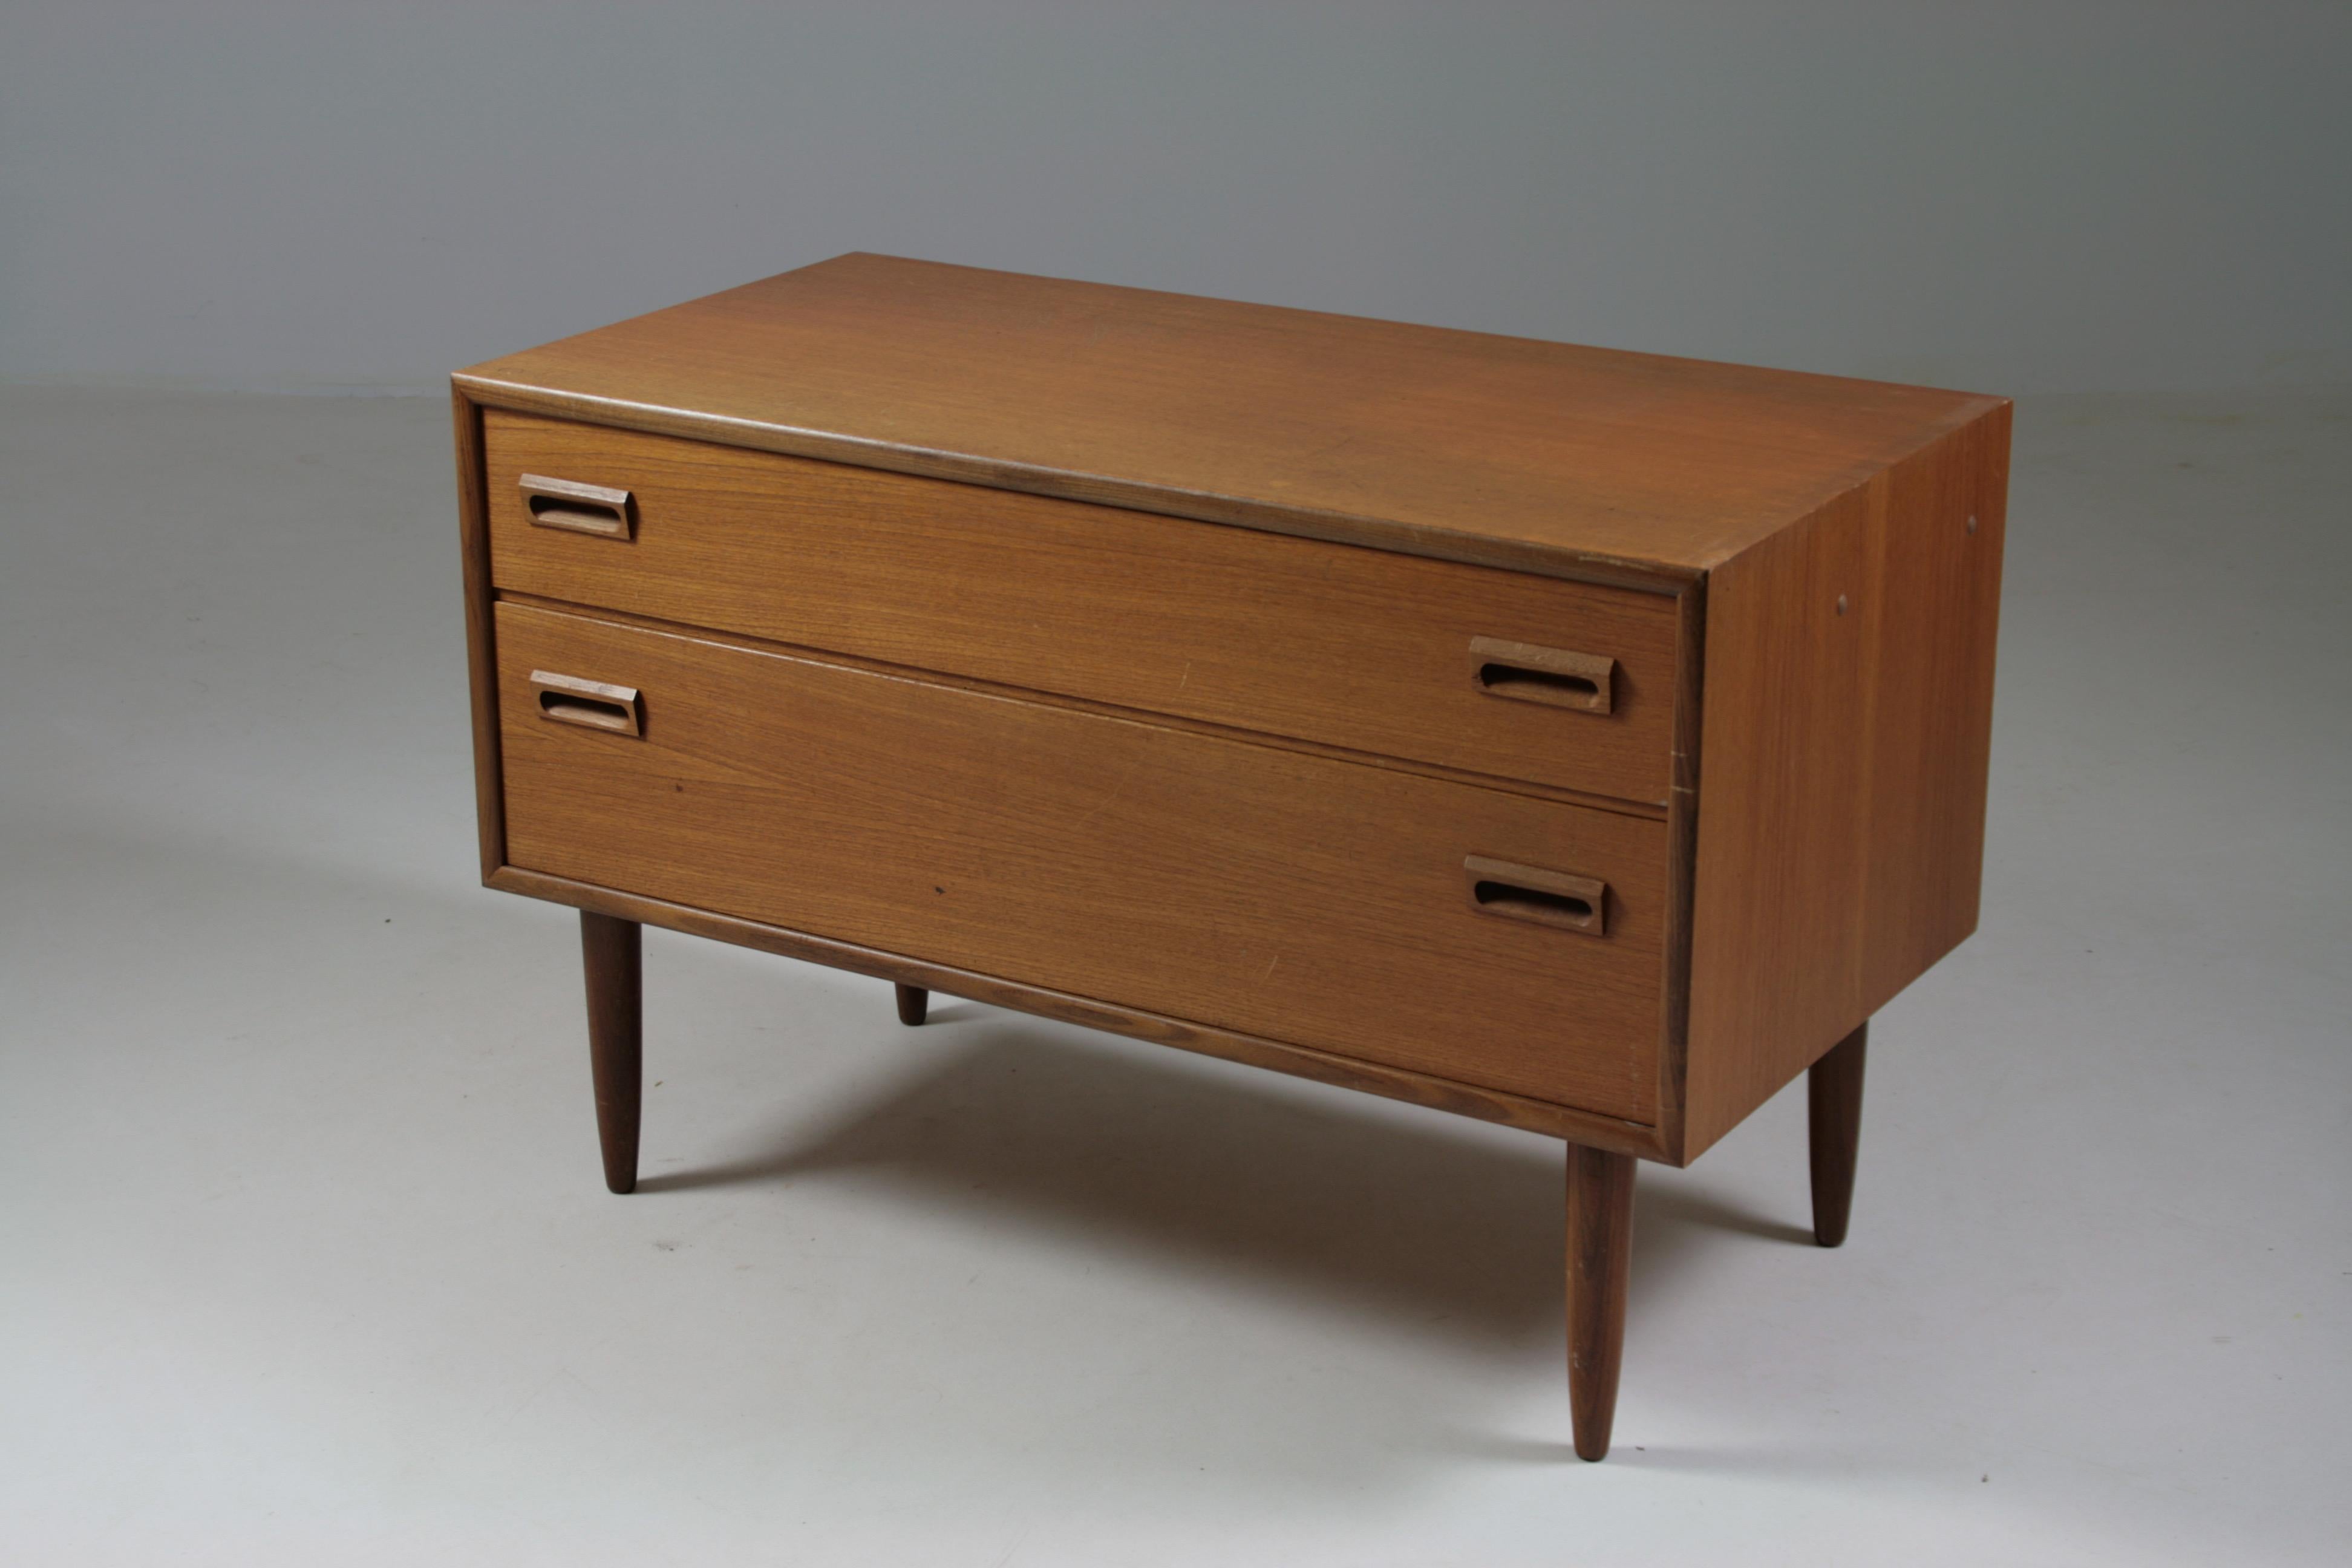 Small teak chest of drawers made by formula meubelen in the Netherlands in the 1950s. two nice sized drawers slide perfectly. The whole thing is supported by 4 spindle feet. The general condition is good with normal traces of use and patina of time.